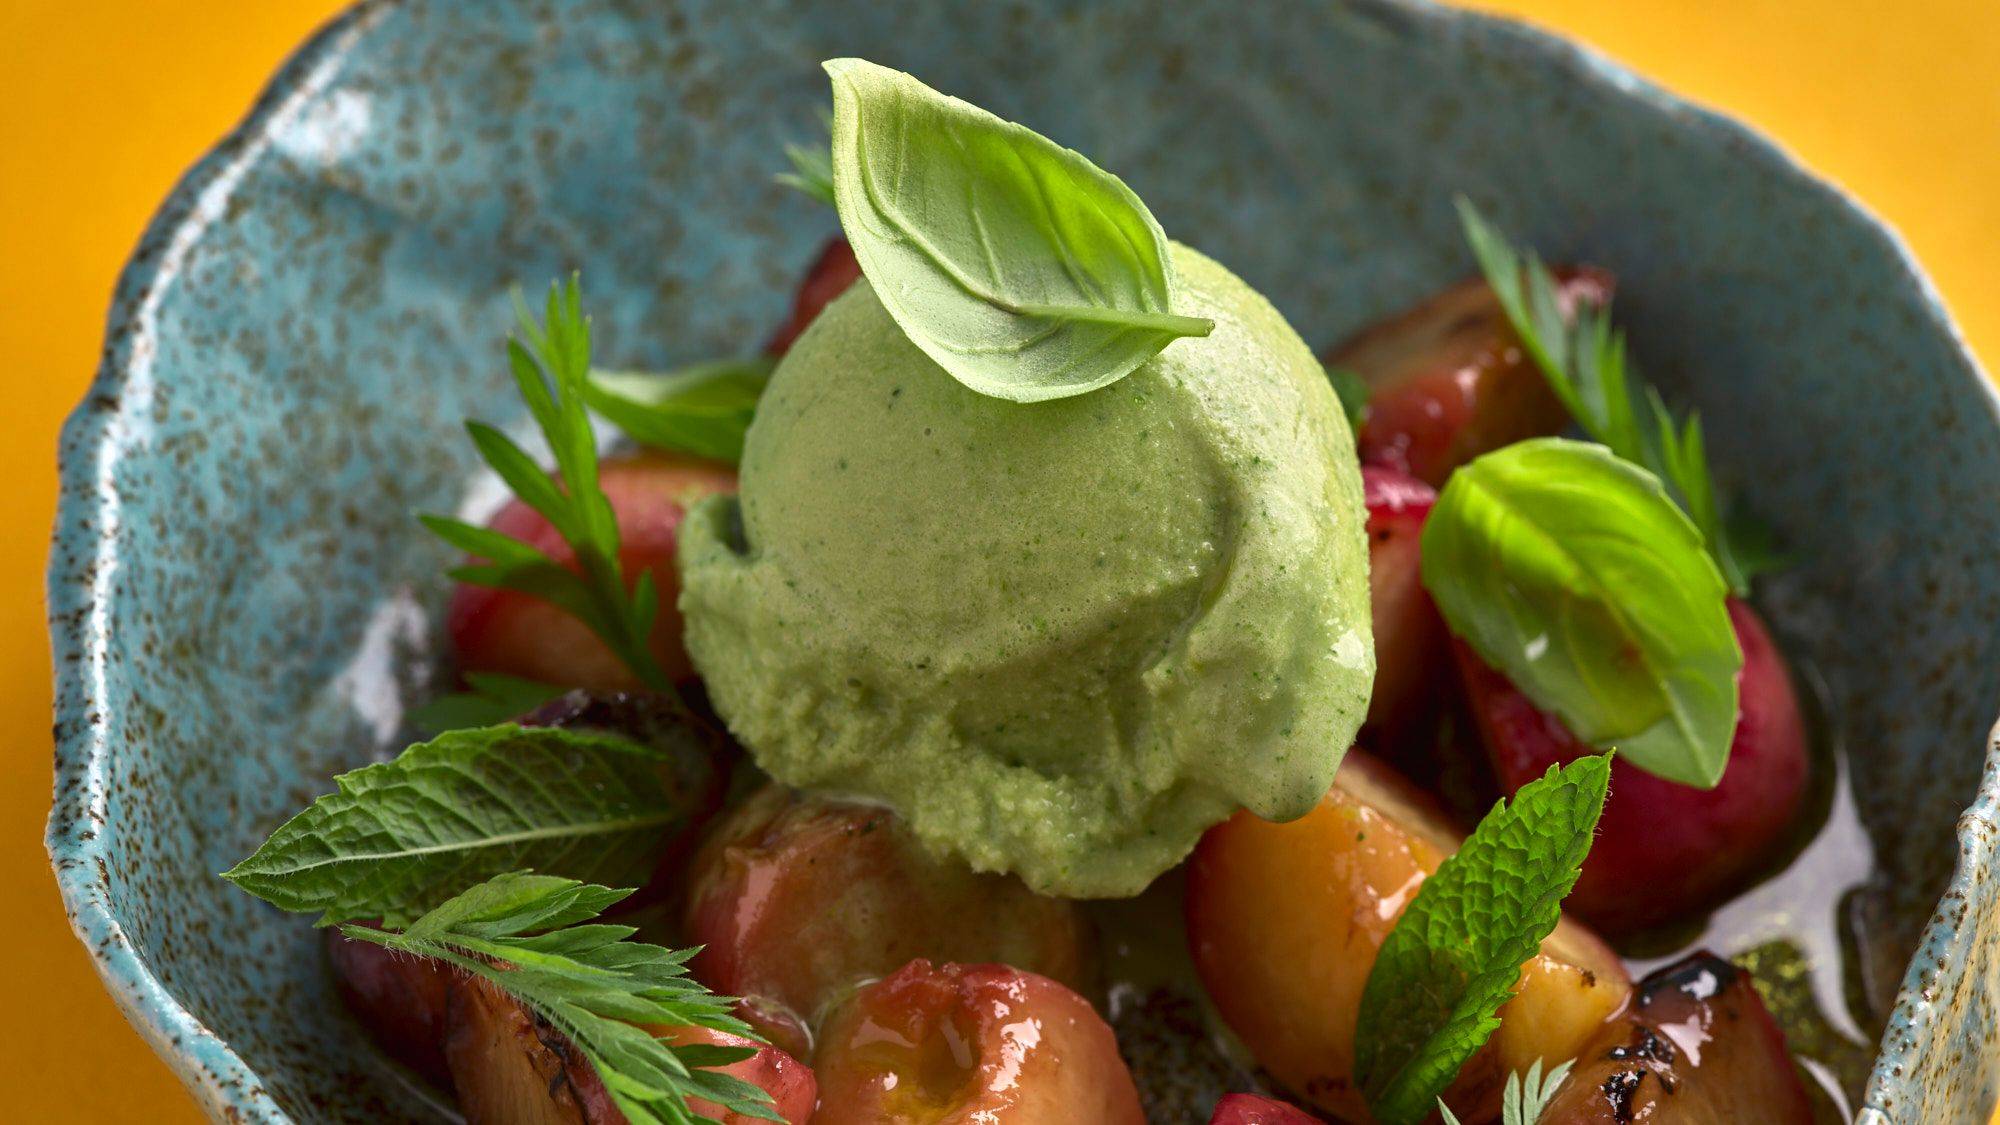 Herbs–Yogurt Ice Cream with Grilled Peaches & Olive Oil